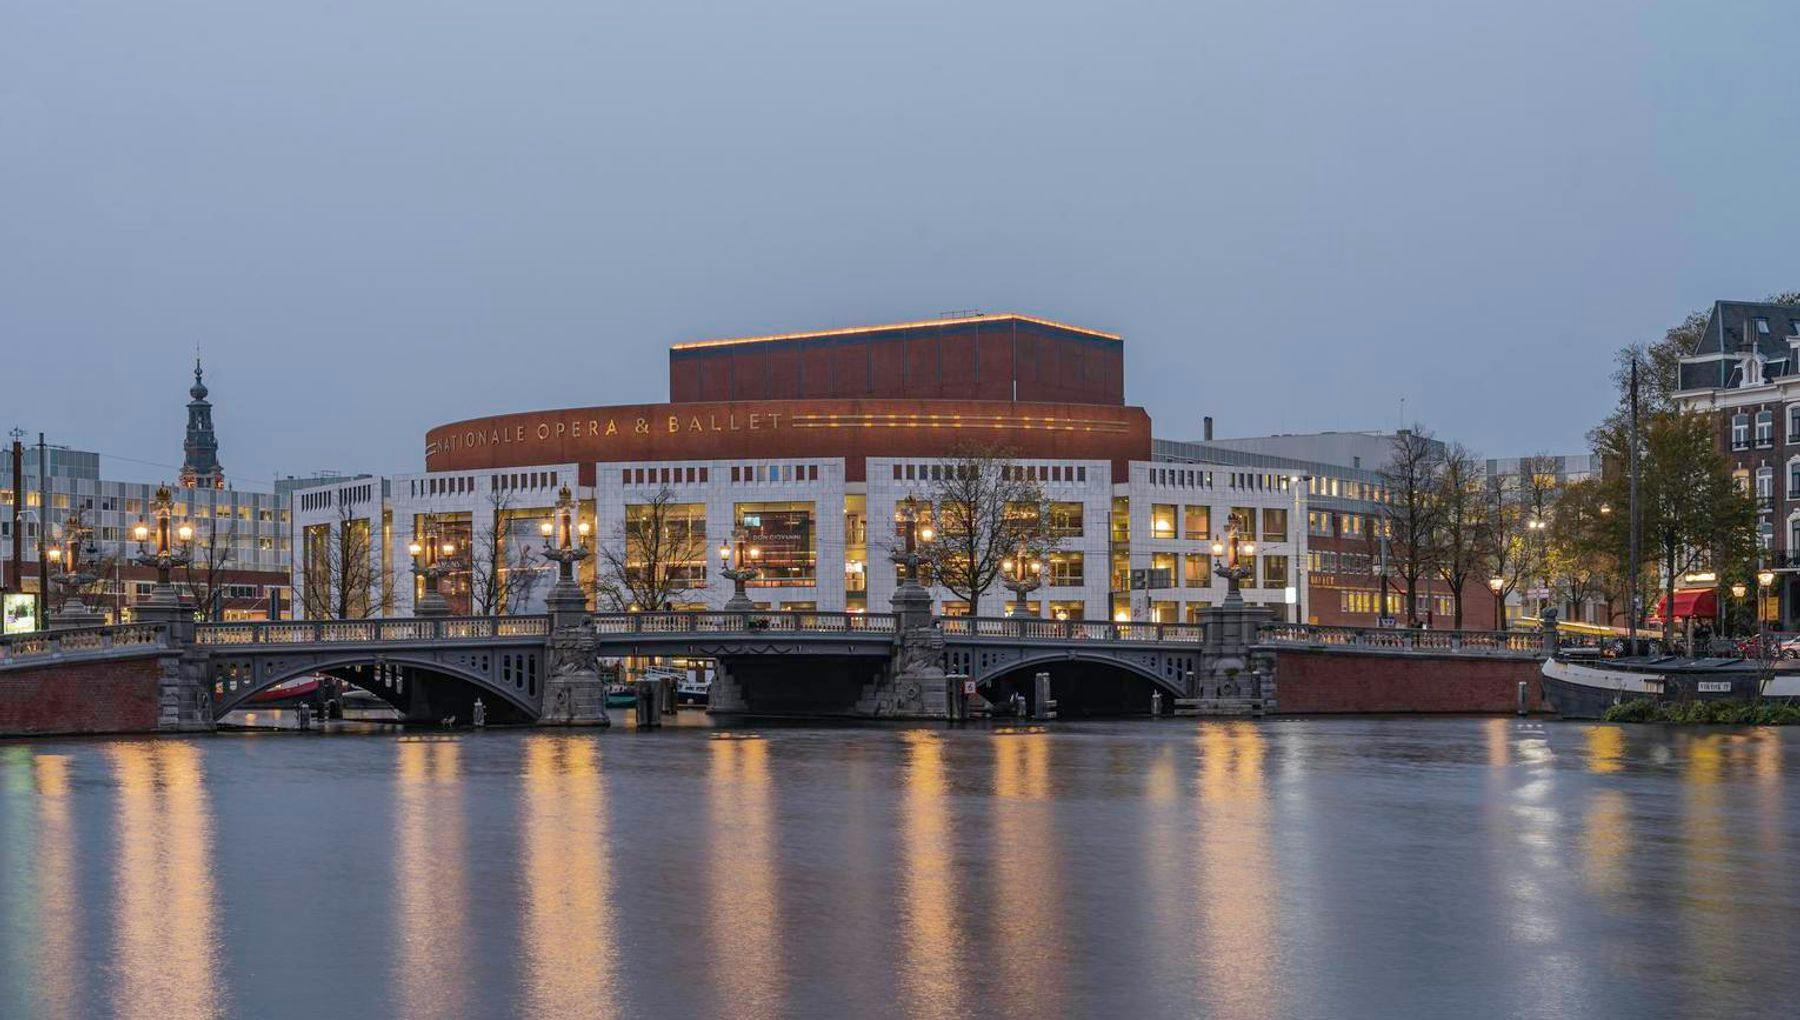 The National Opera & Ballet at nightfall, seen from a distance. This cultural institution is located at the Amstel river, close to Waterlooplein in the city centre.